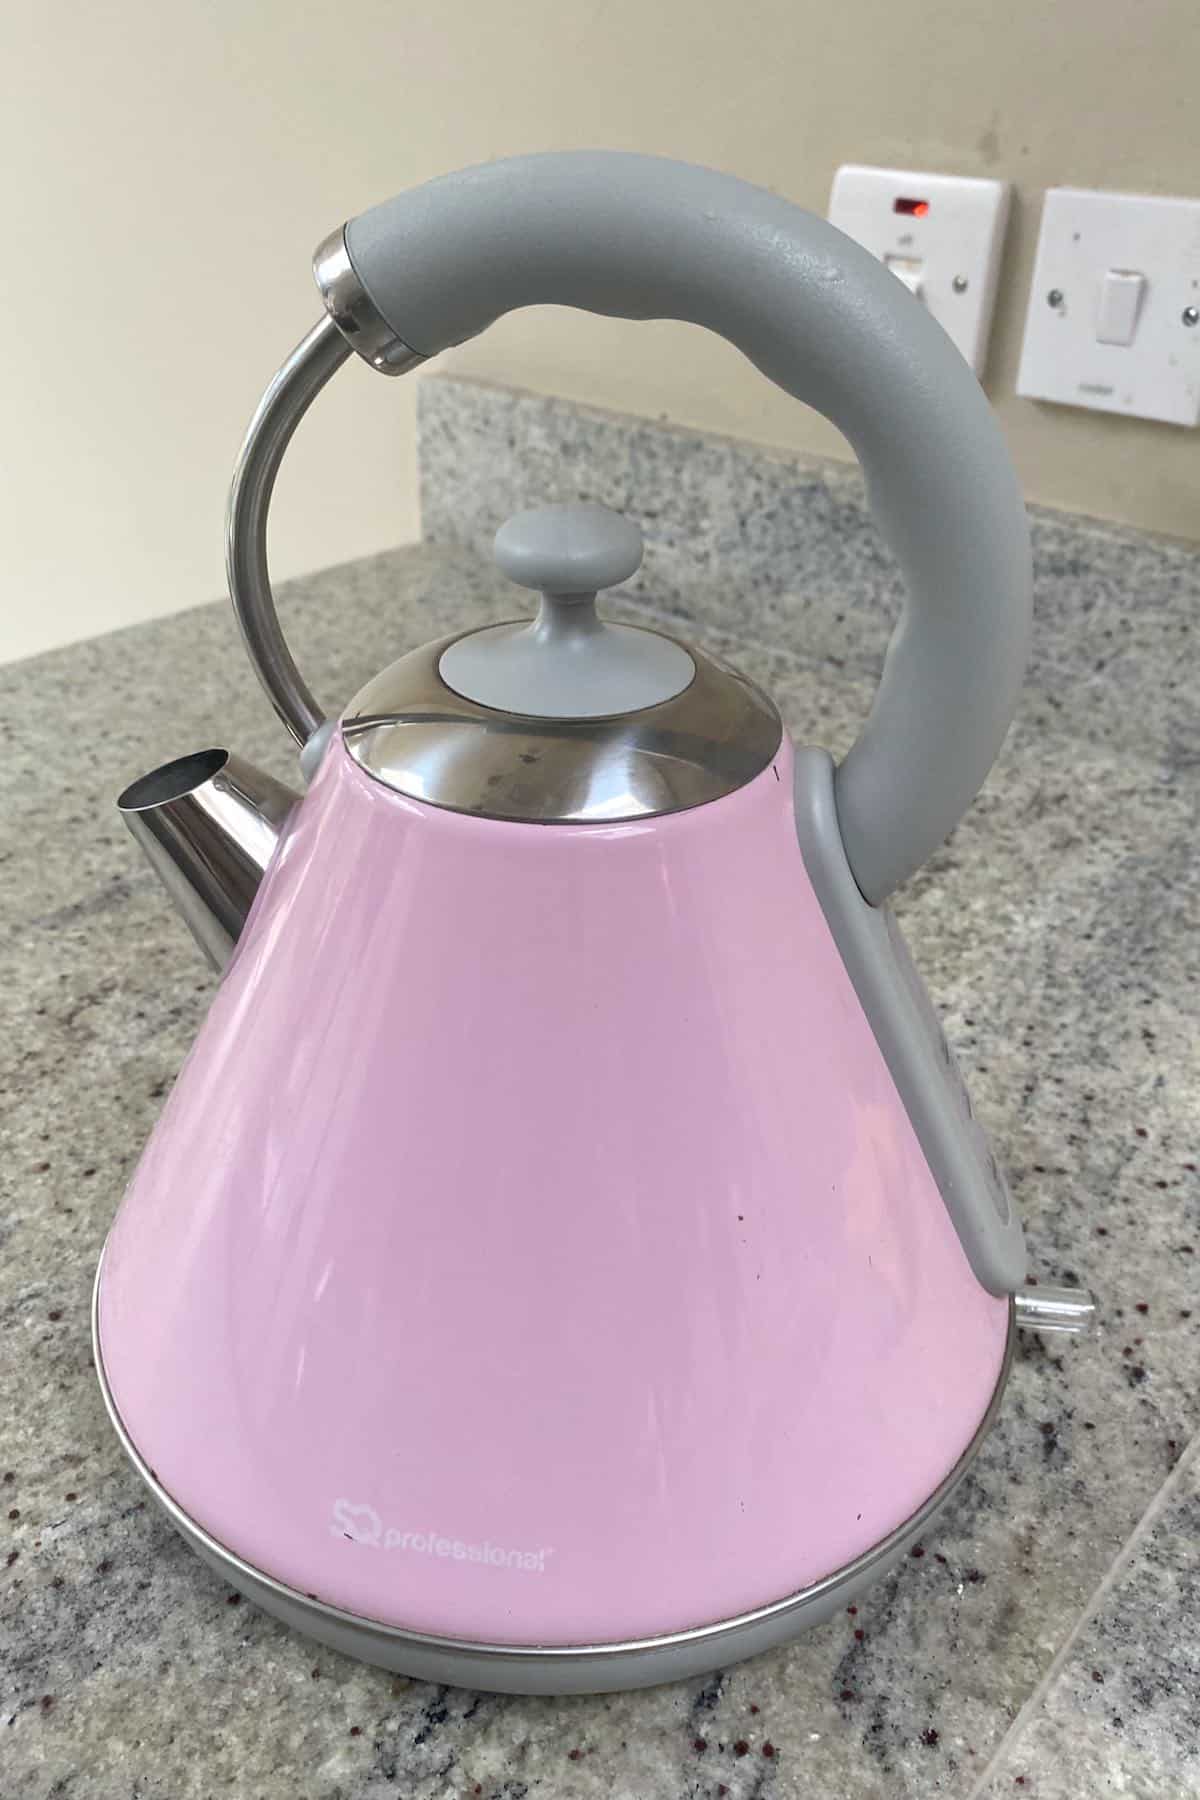 Why Americans Don't Use Electric Kettles